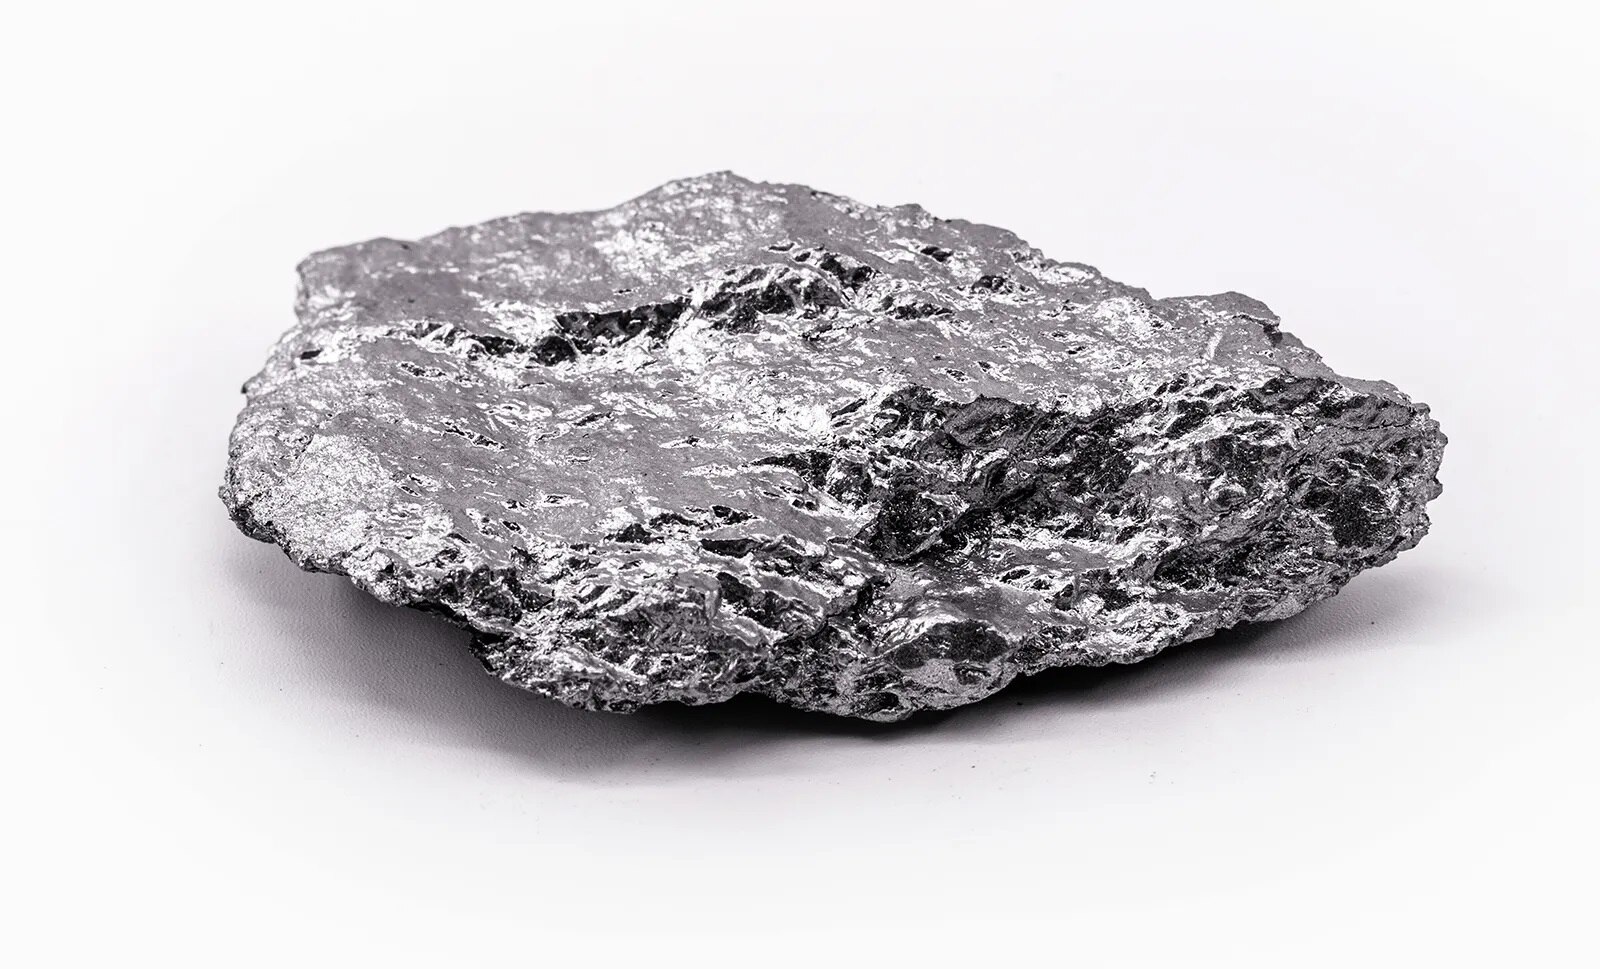 20-fun-facts-about-molybdenum